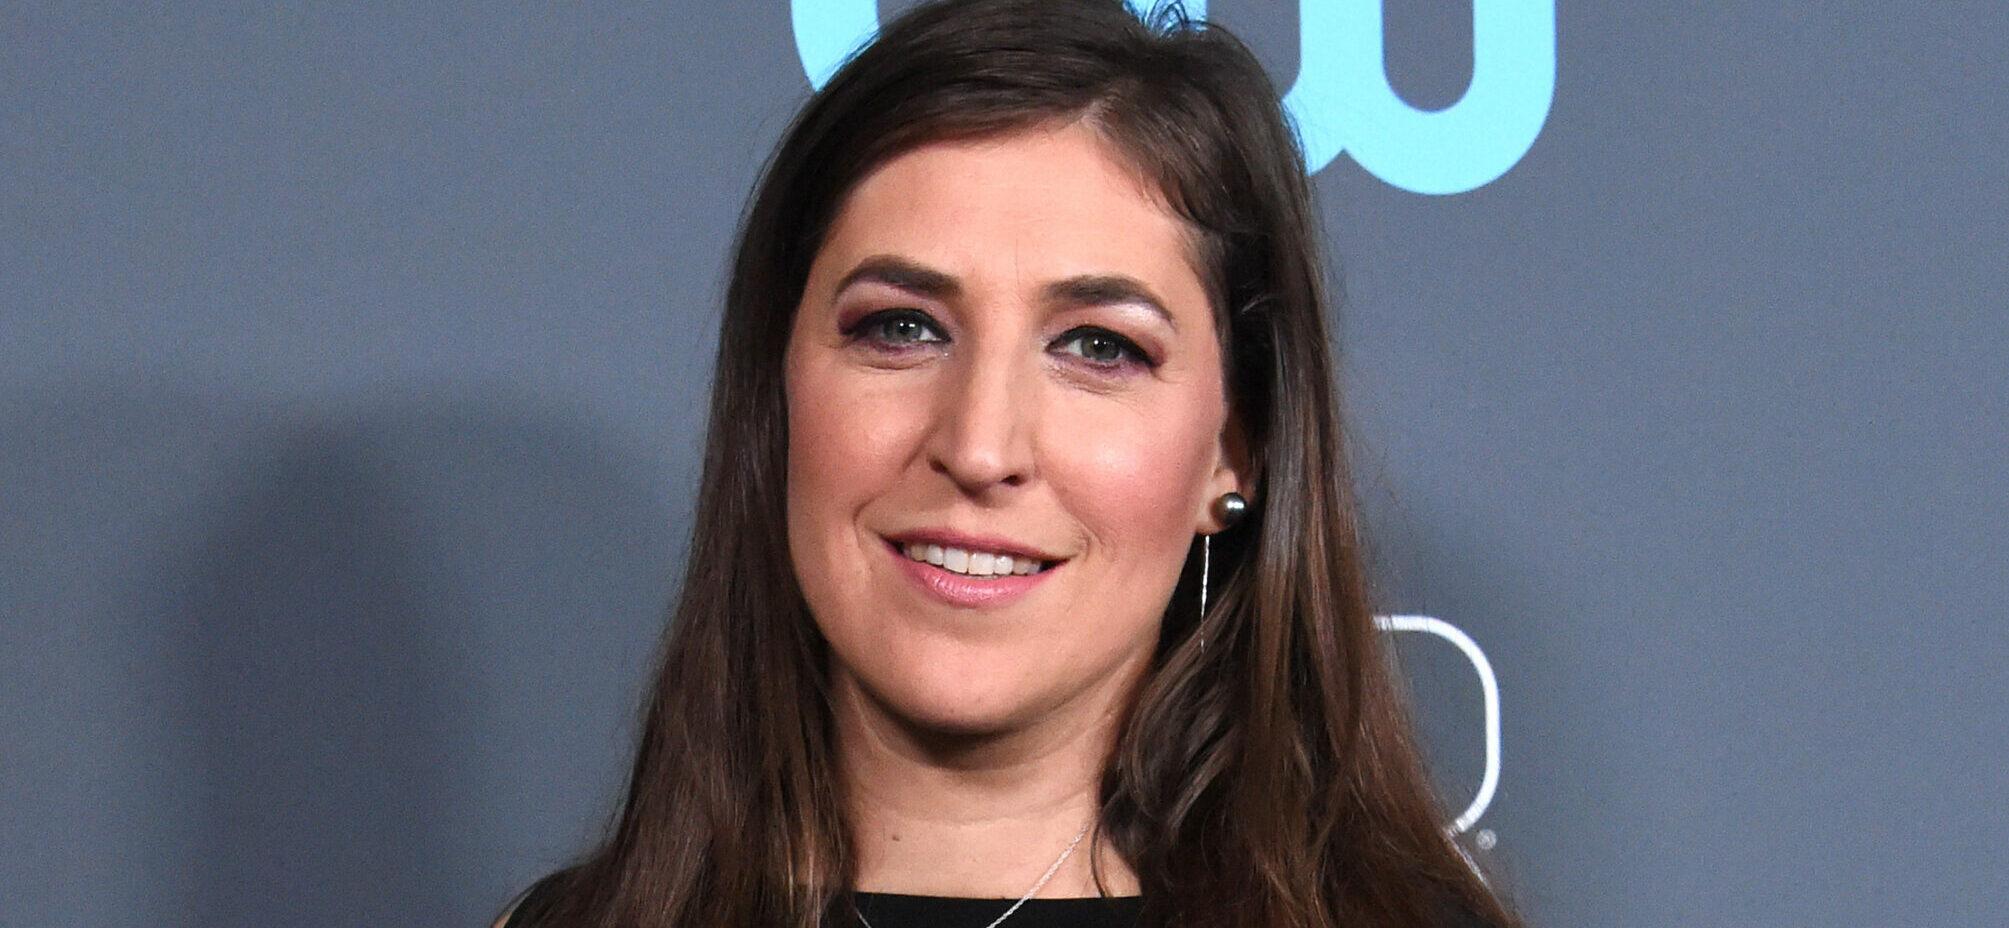 Mayim Bialik Tempts Crew With Cupcakes To Win ‘Jeopardy!’ Hosting Gig